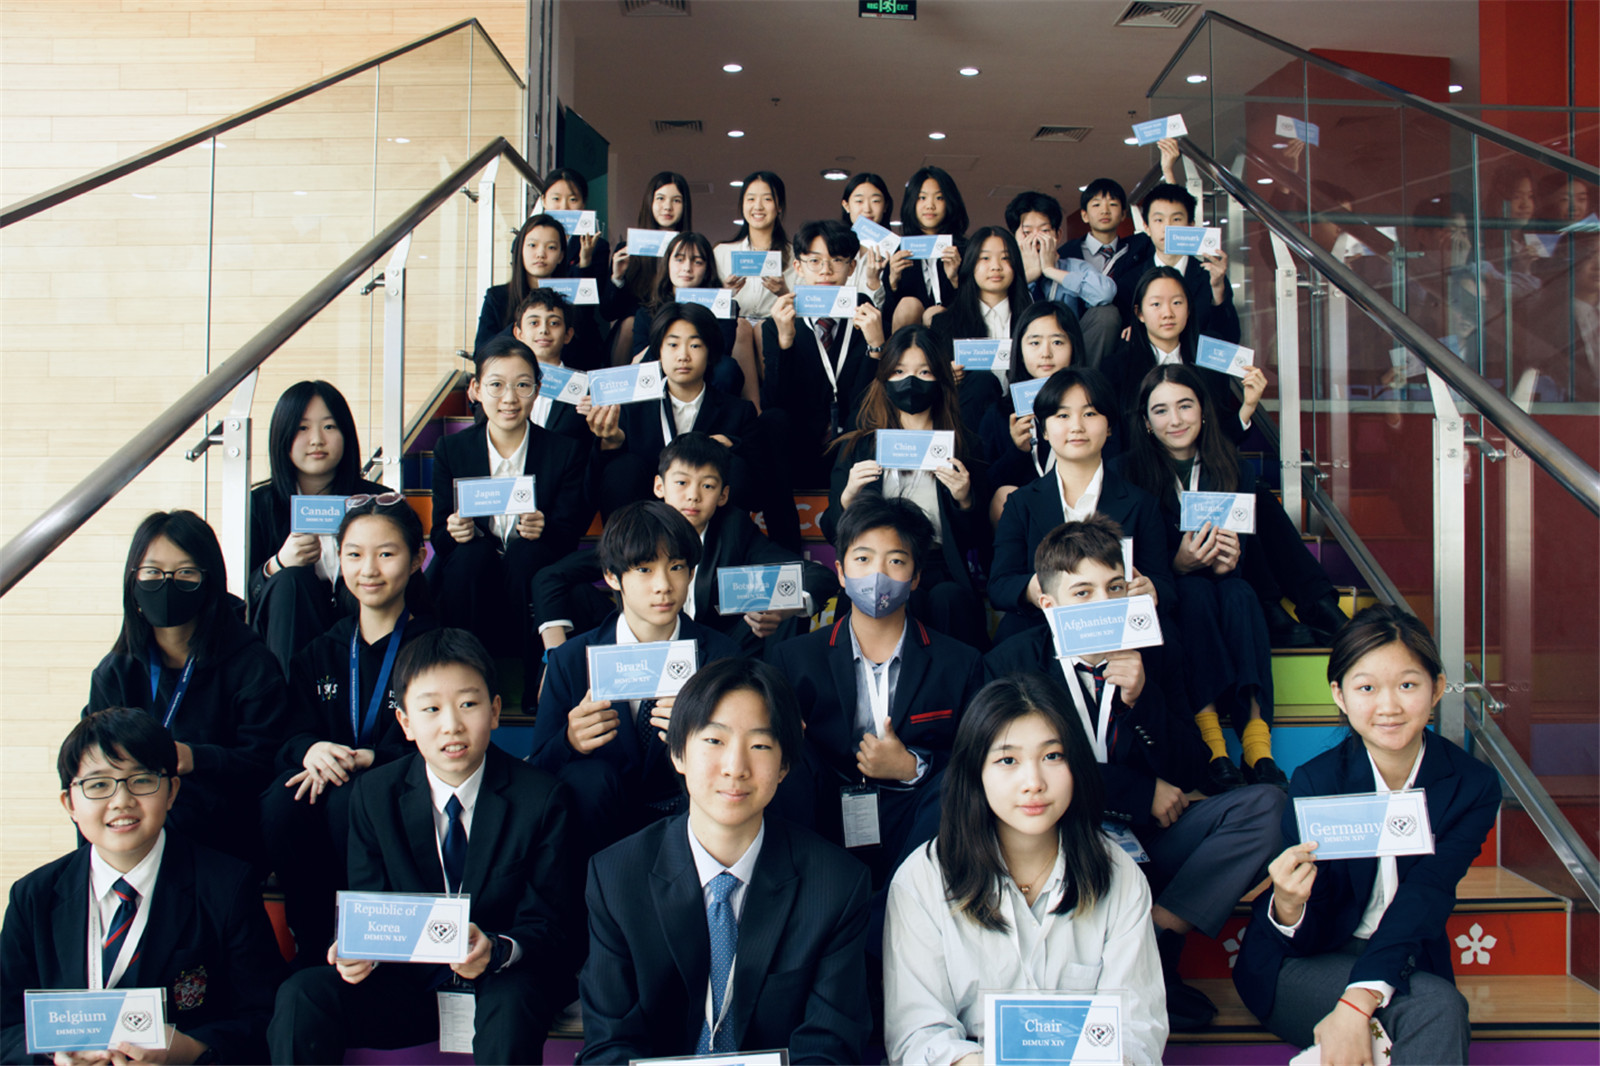 Dulwich International Model United Nations conference